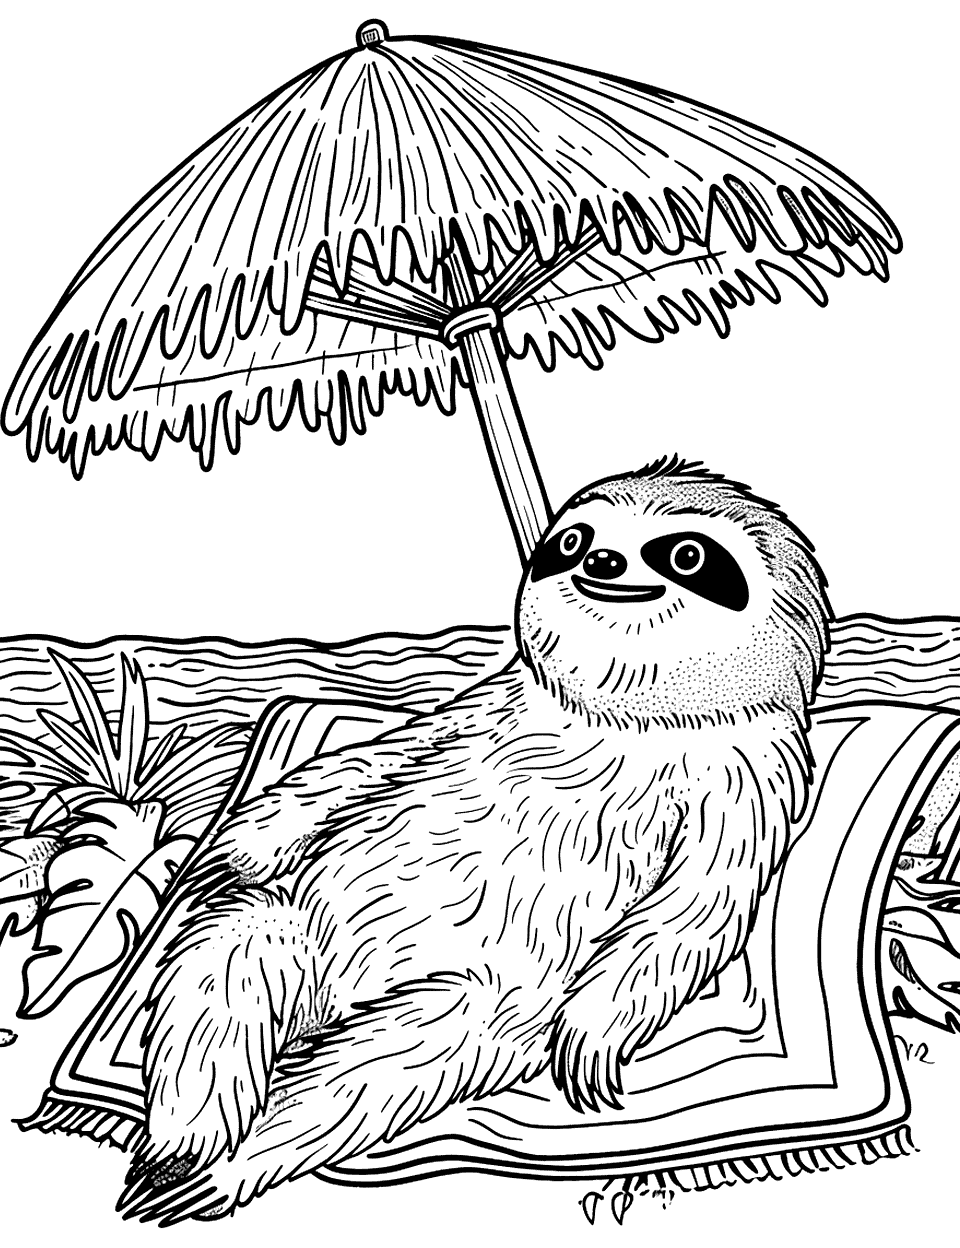 Sloth at the Beach Coloring Page - A sloth lying on a towel under a sun umbrella, with a basic sandy beach and ocean backdrop.